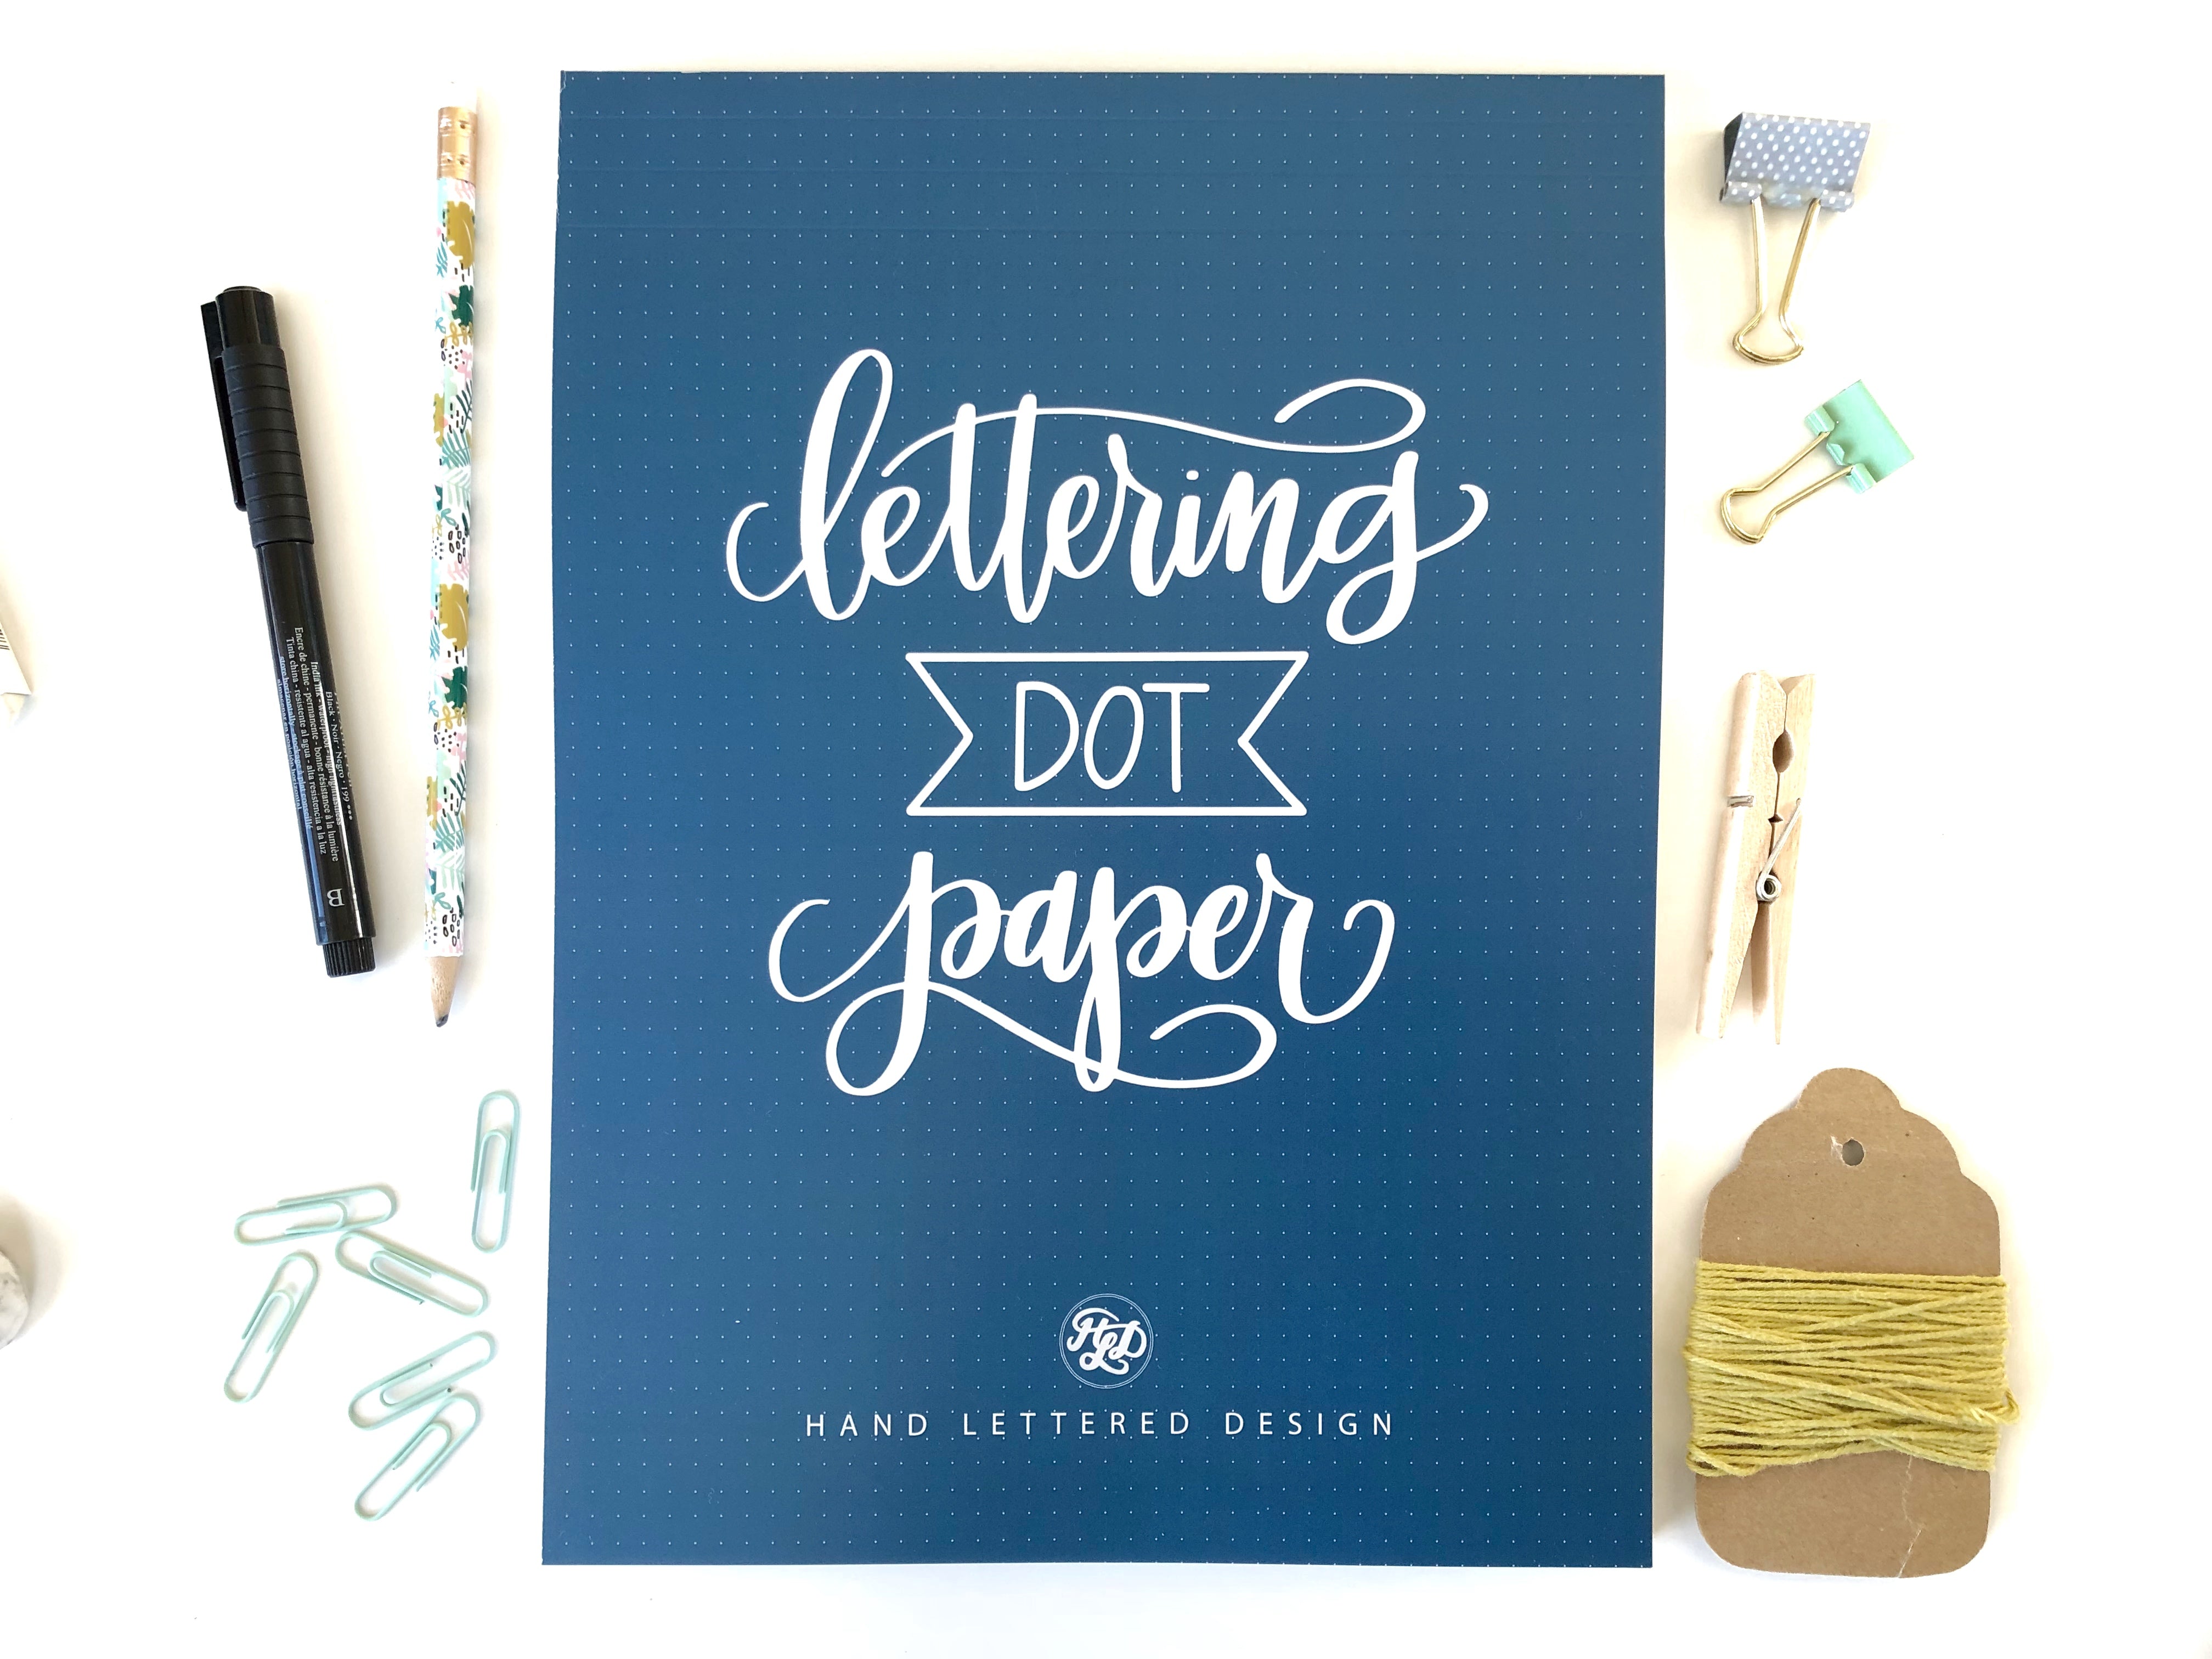 Hand Lettering: 8.5 X 11 DOT GRID LARGE CALLIGRAPHY NOTEBOOK 100